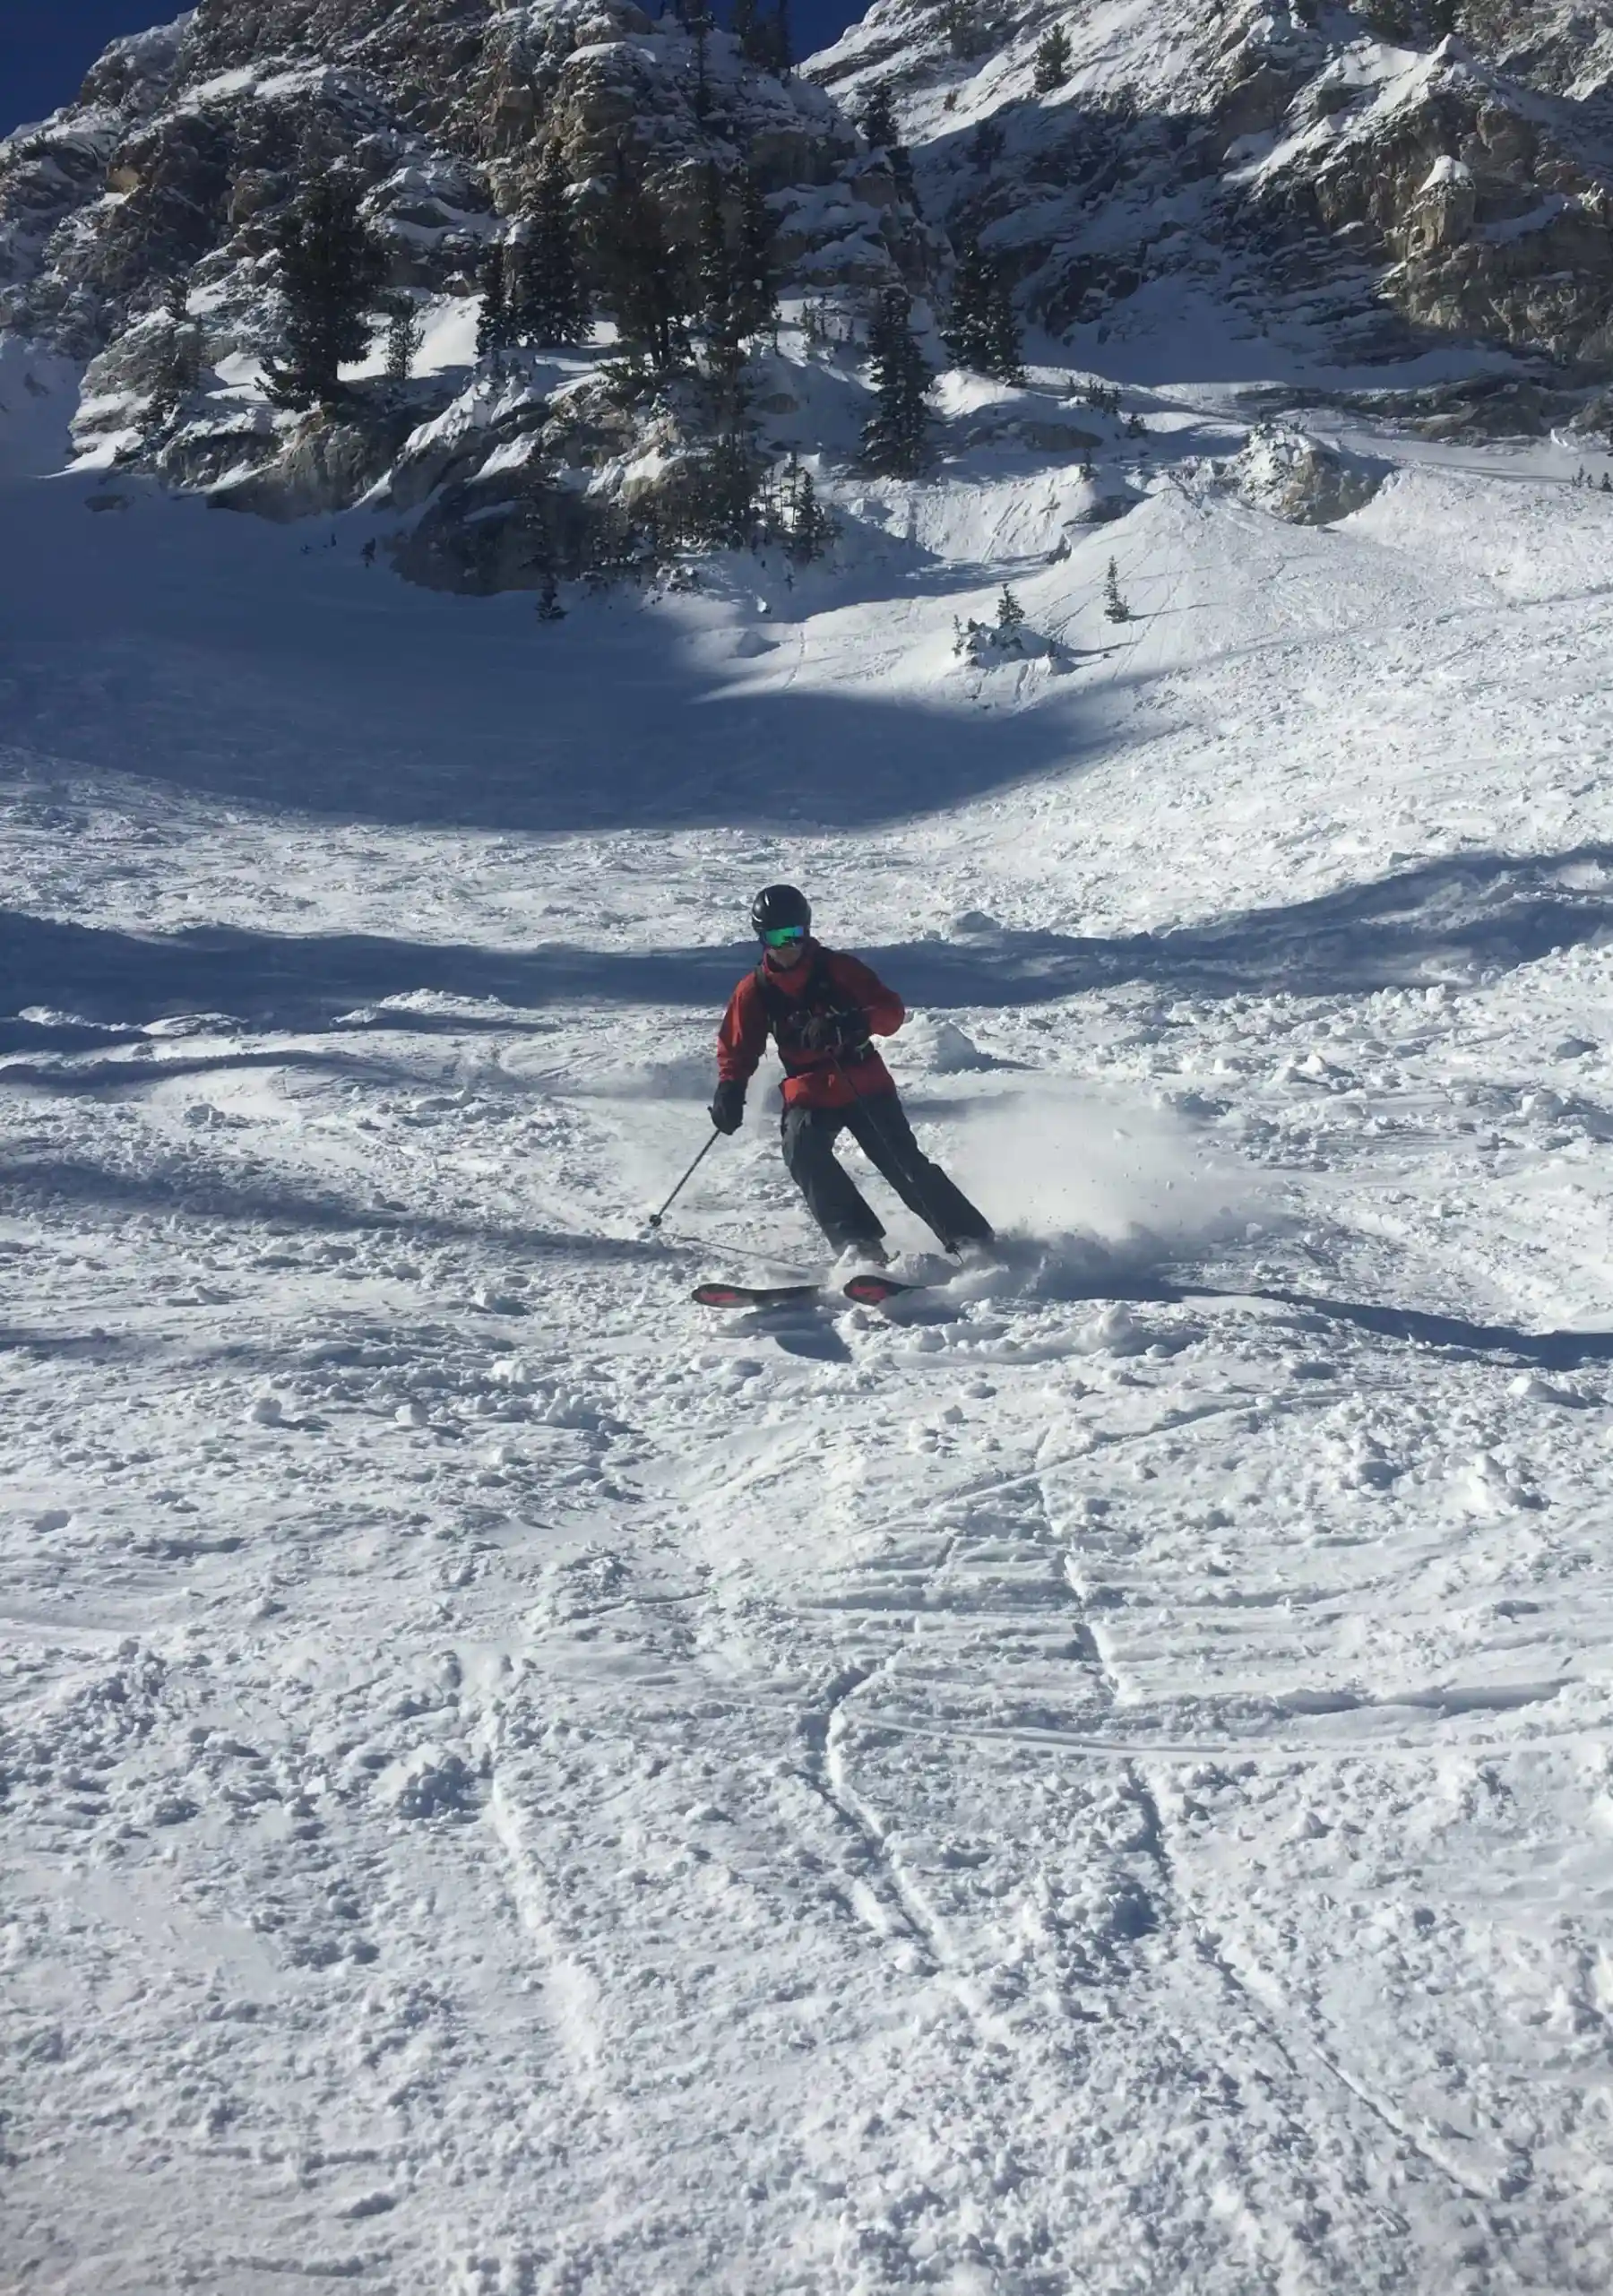 Keith is shredding some turns at the base of Fantasy Ridge in Honeycomb Canyon